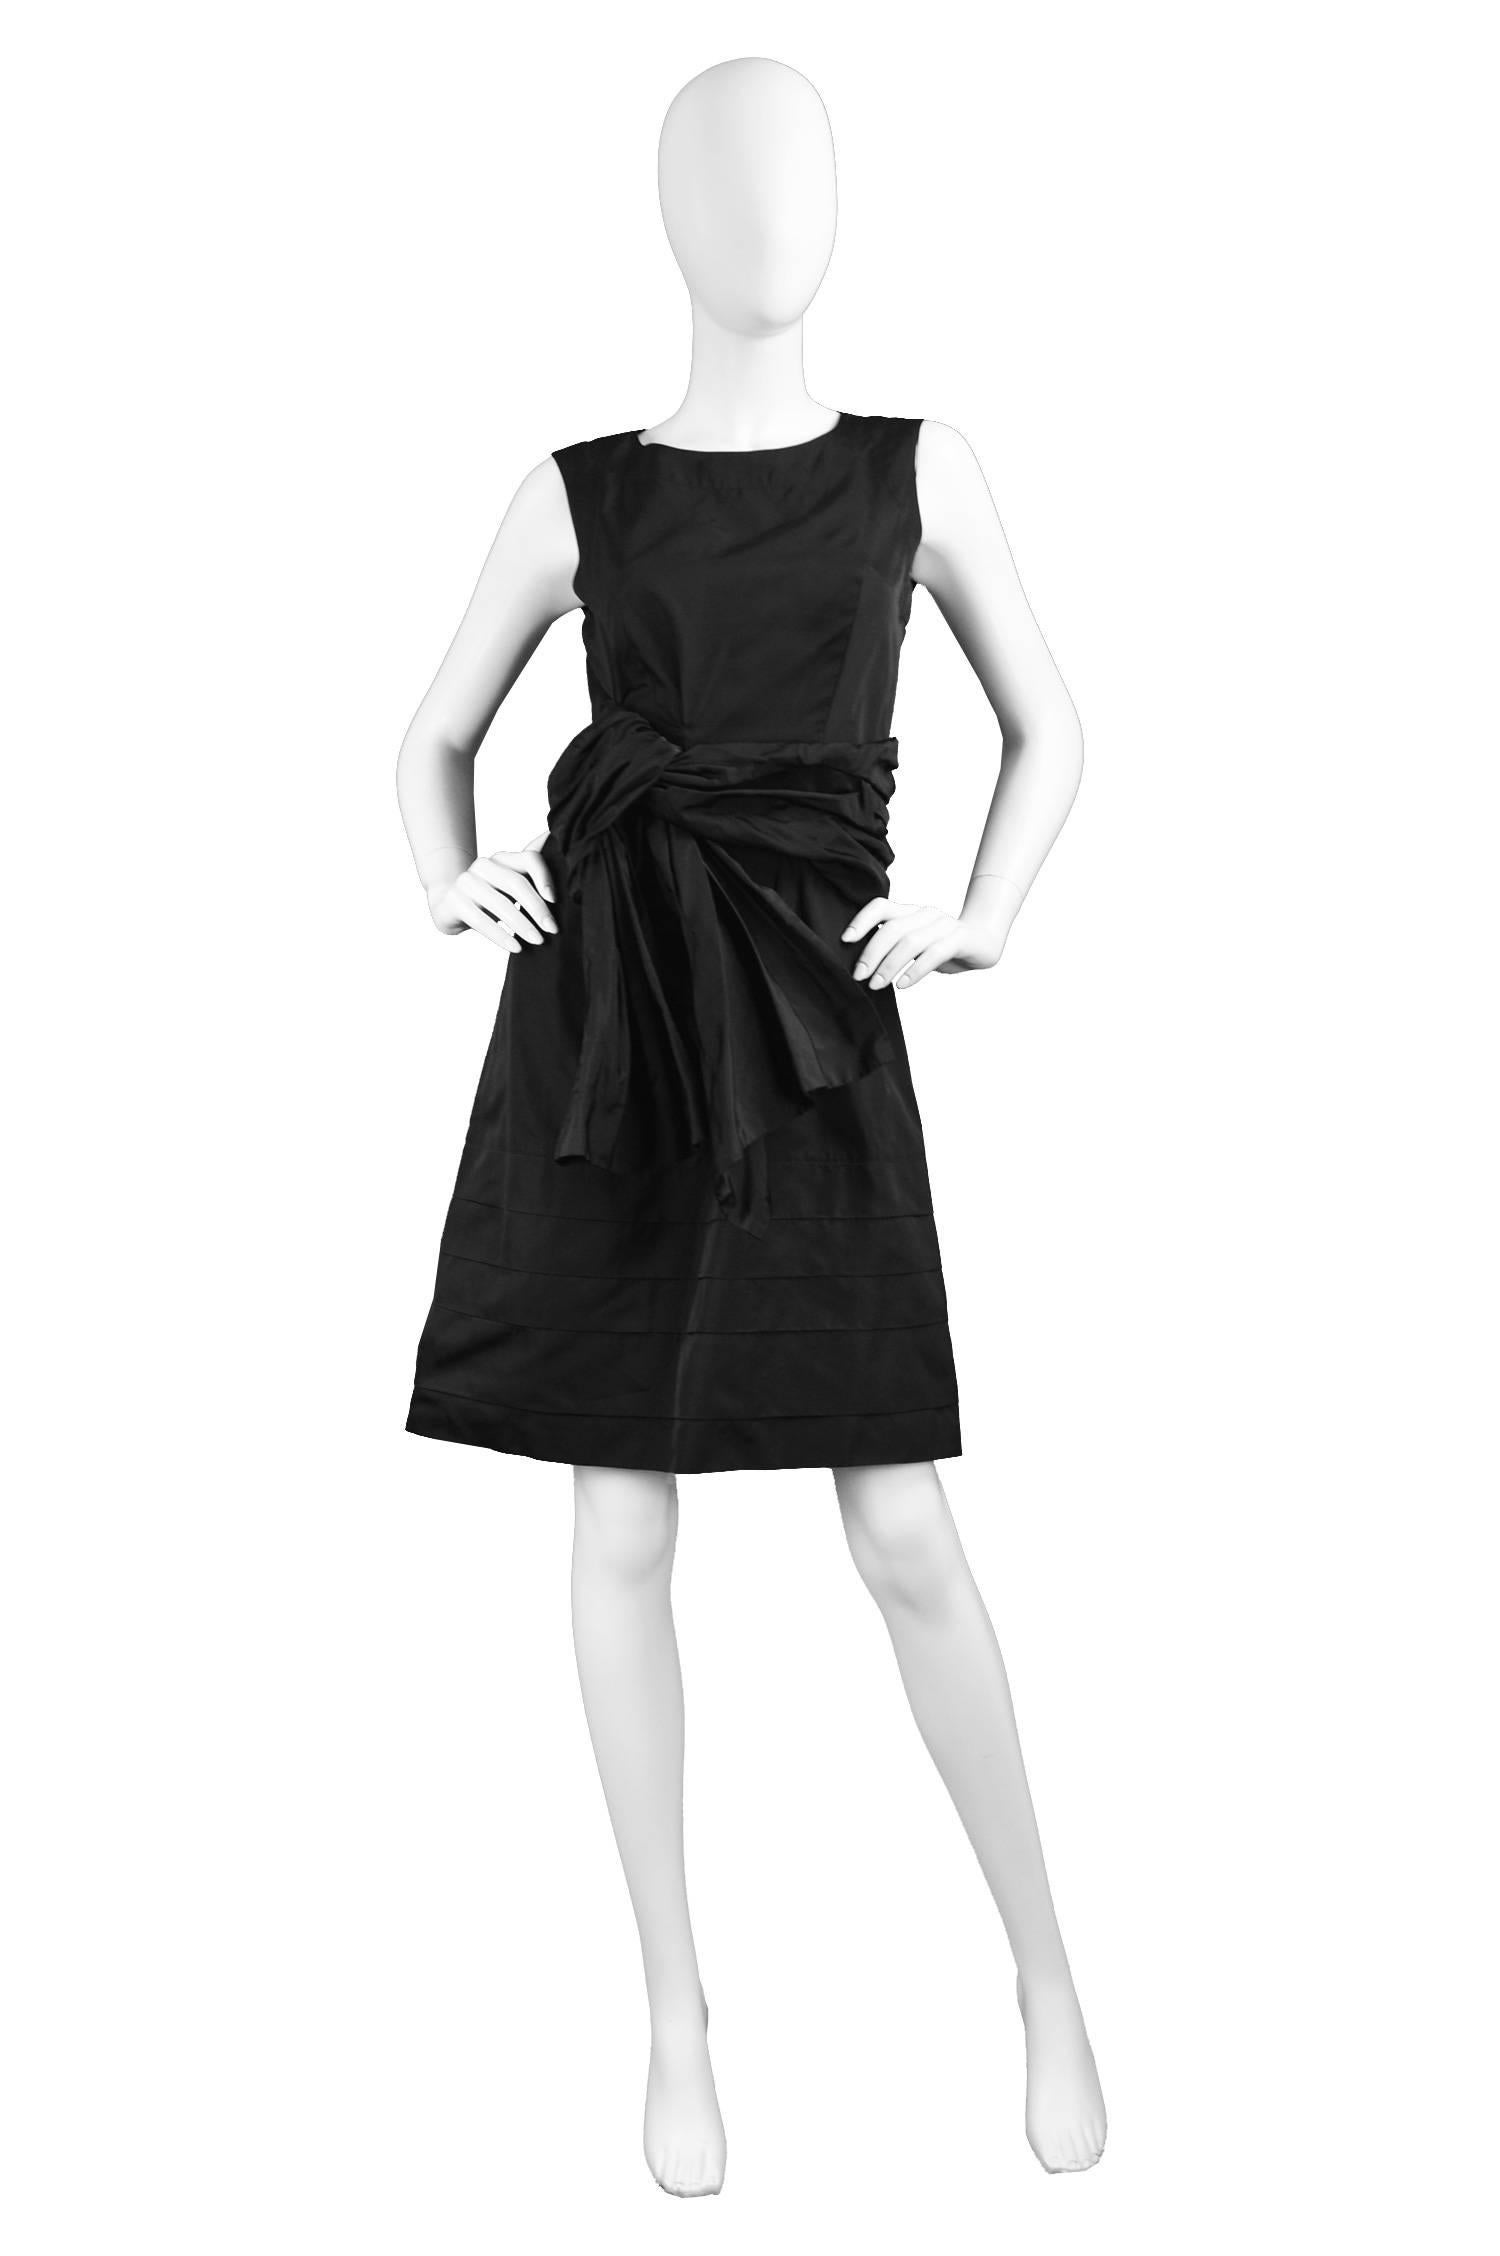 A chic sleeveless evening / party dress by Chloé. In a black 100% silk taffeta which gives incredible sheen and a tiered skirt. With a draped / soft pleated detail at the waist which looks like a nonchalantly deconstructed bow. 

Size: Label states